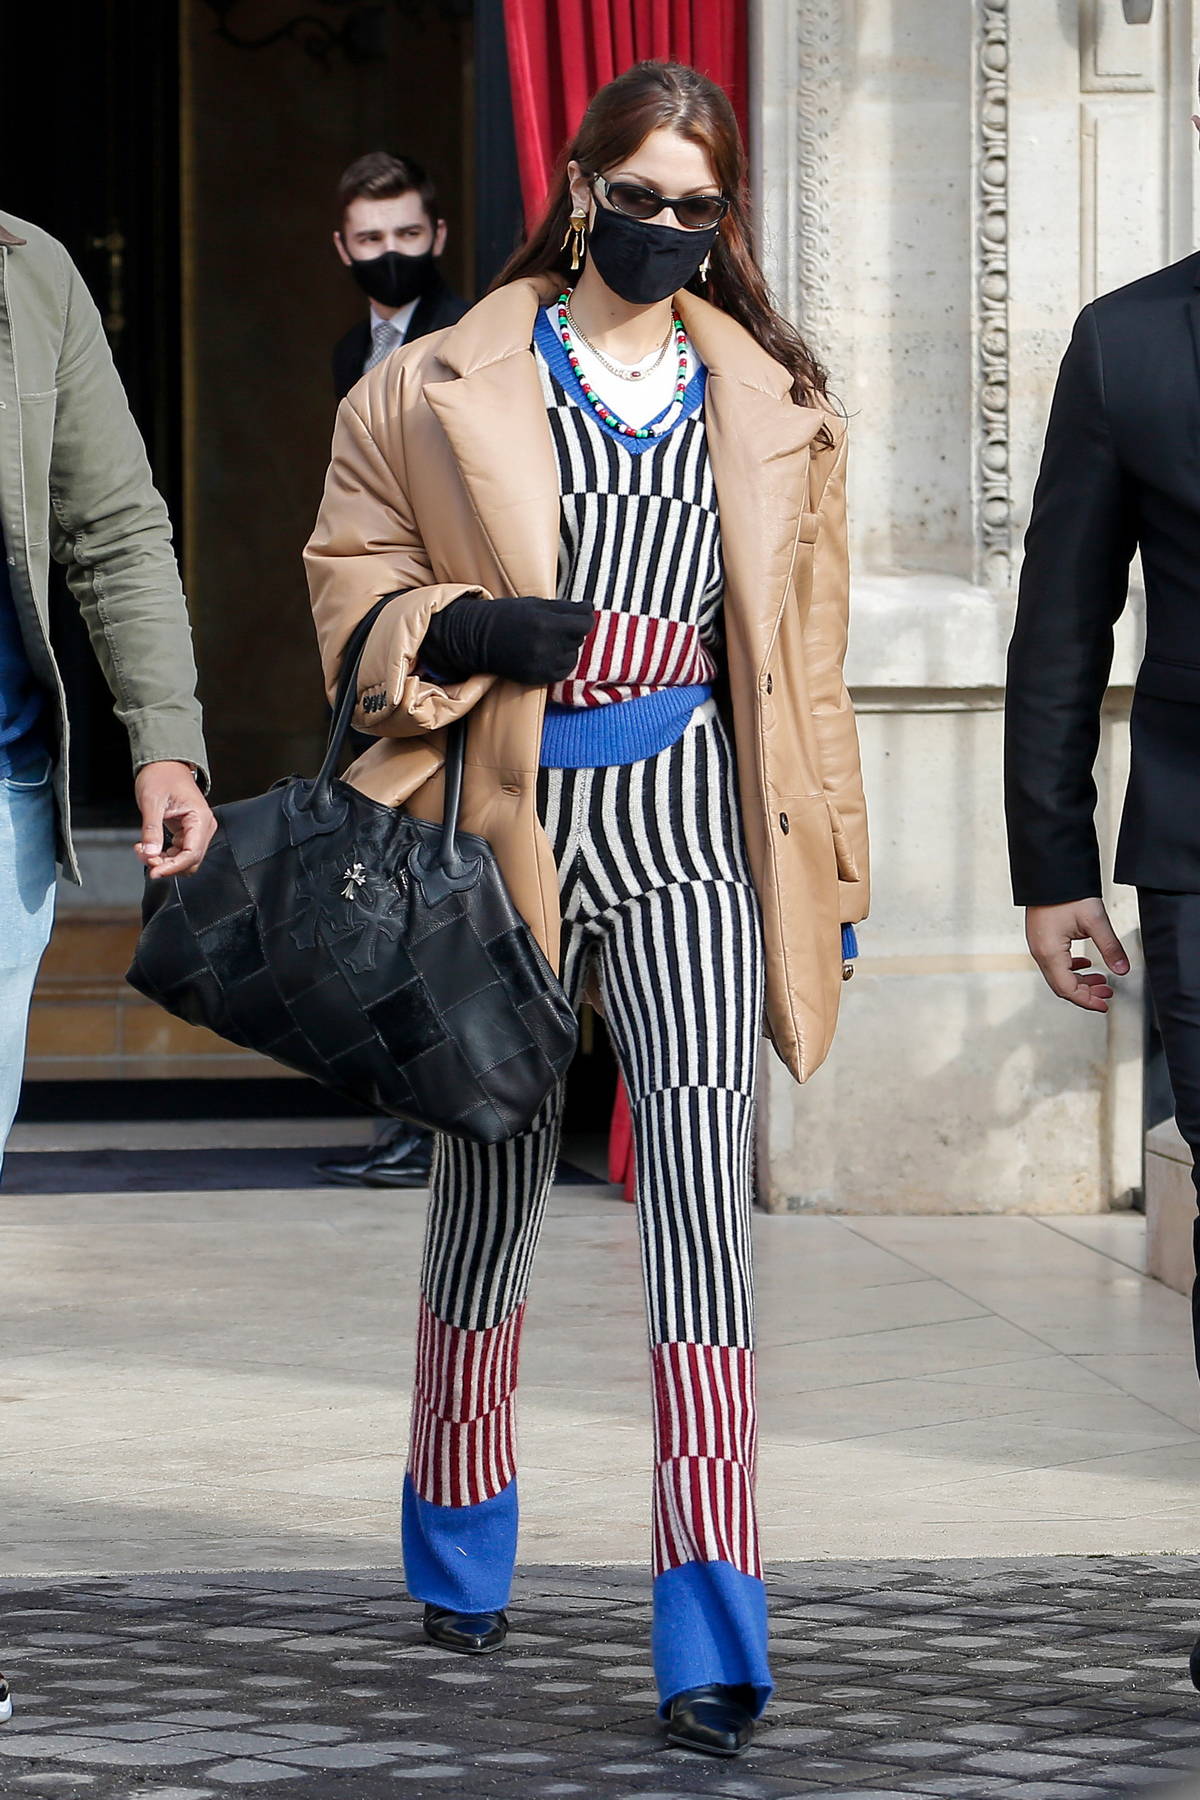 Bella Hadid looks stylish in stripes as she leaves her hotel during Paris  Fashion Week 2021